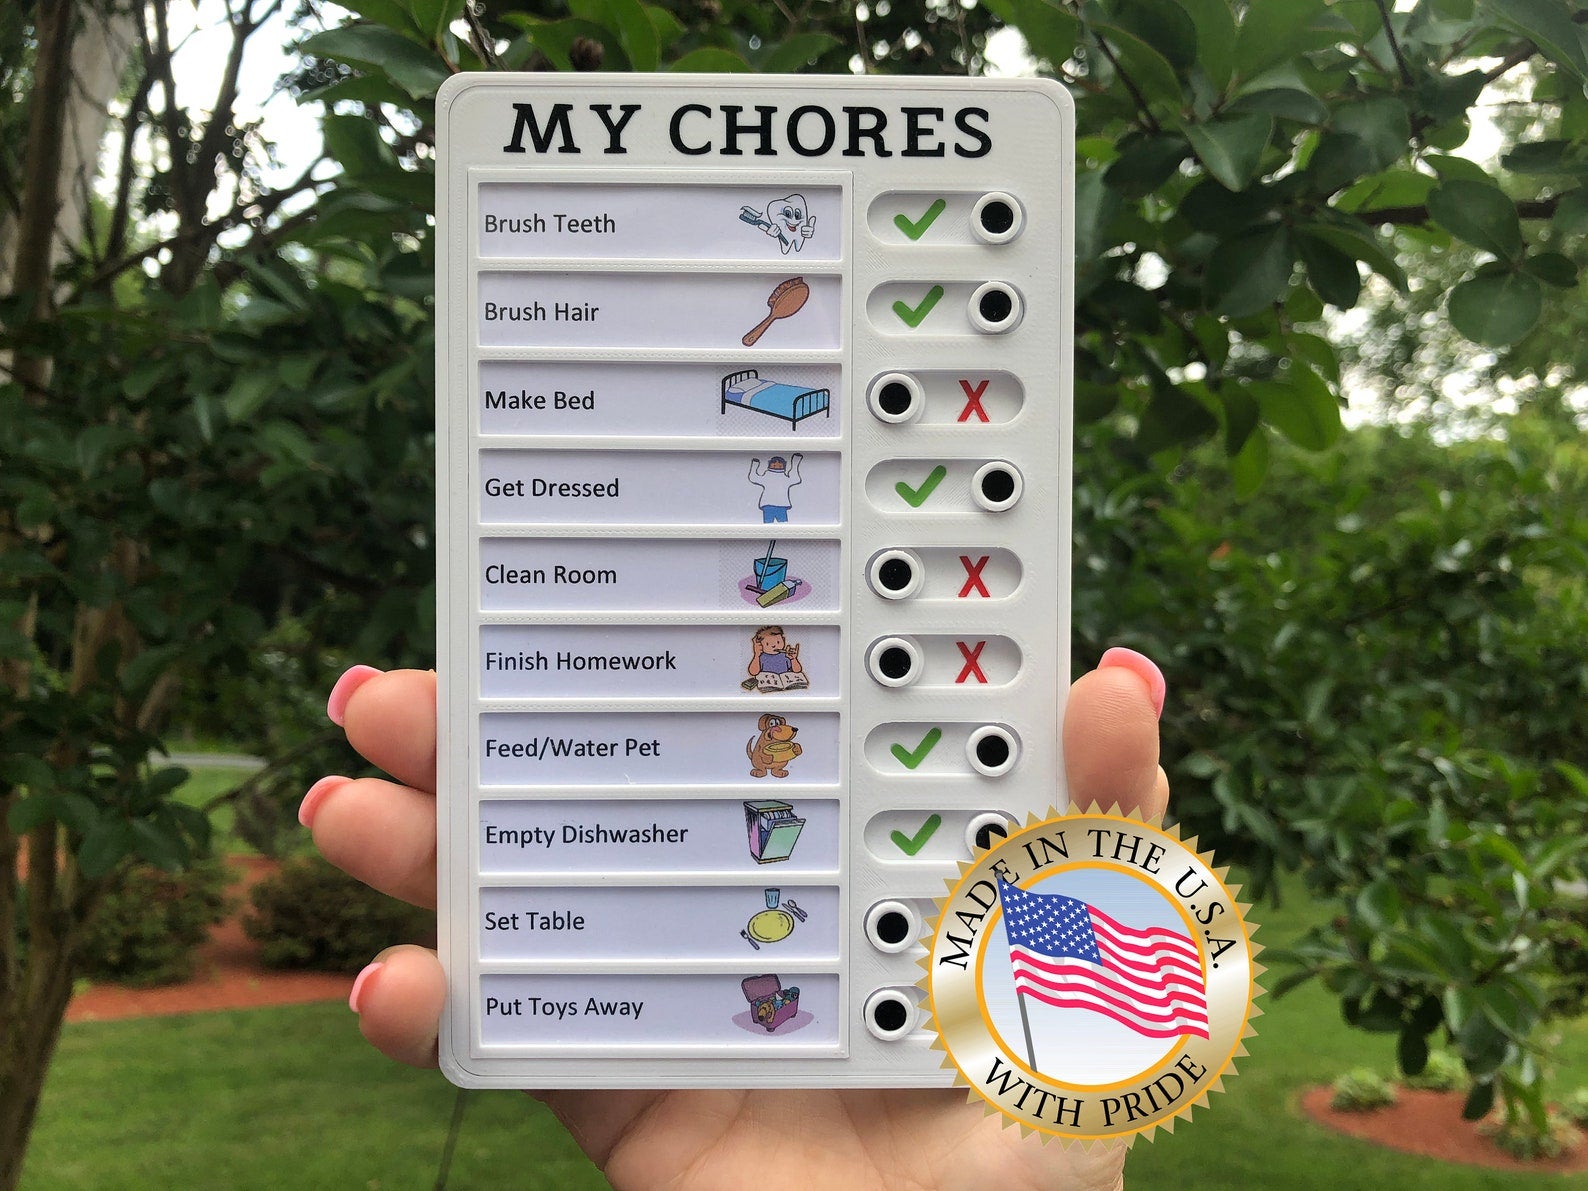 Model holding small rectangular list of chores with toggles indicating if they're been completed or not 